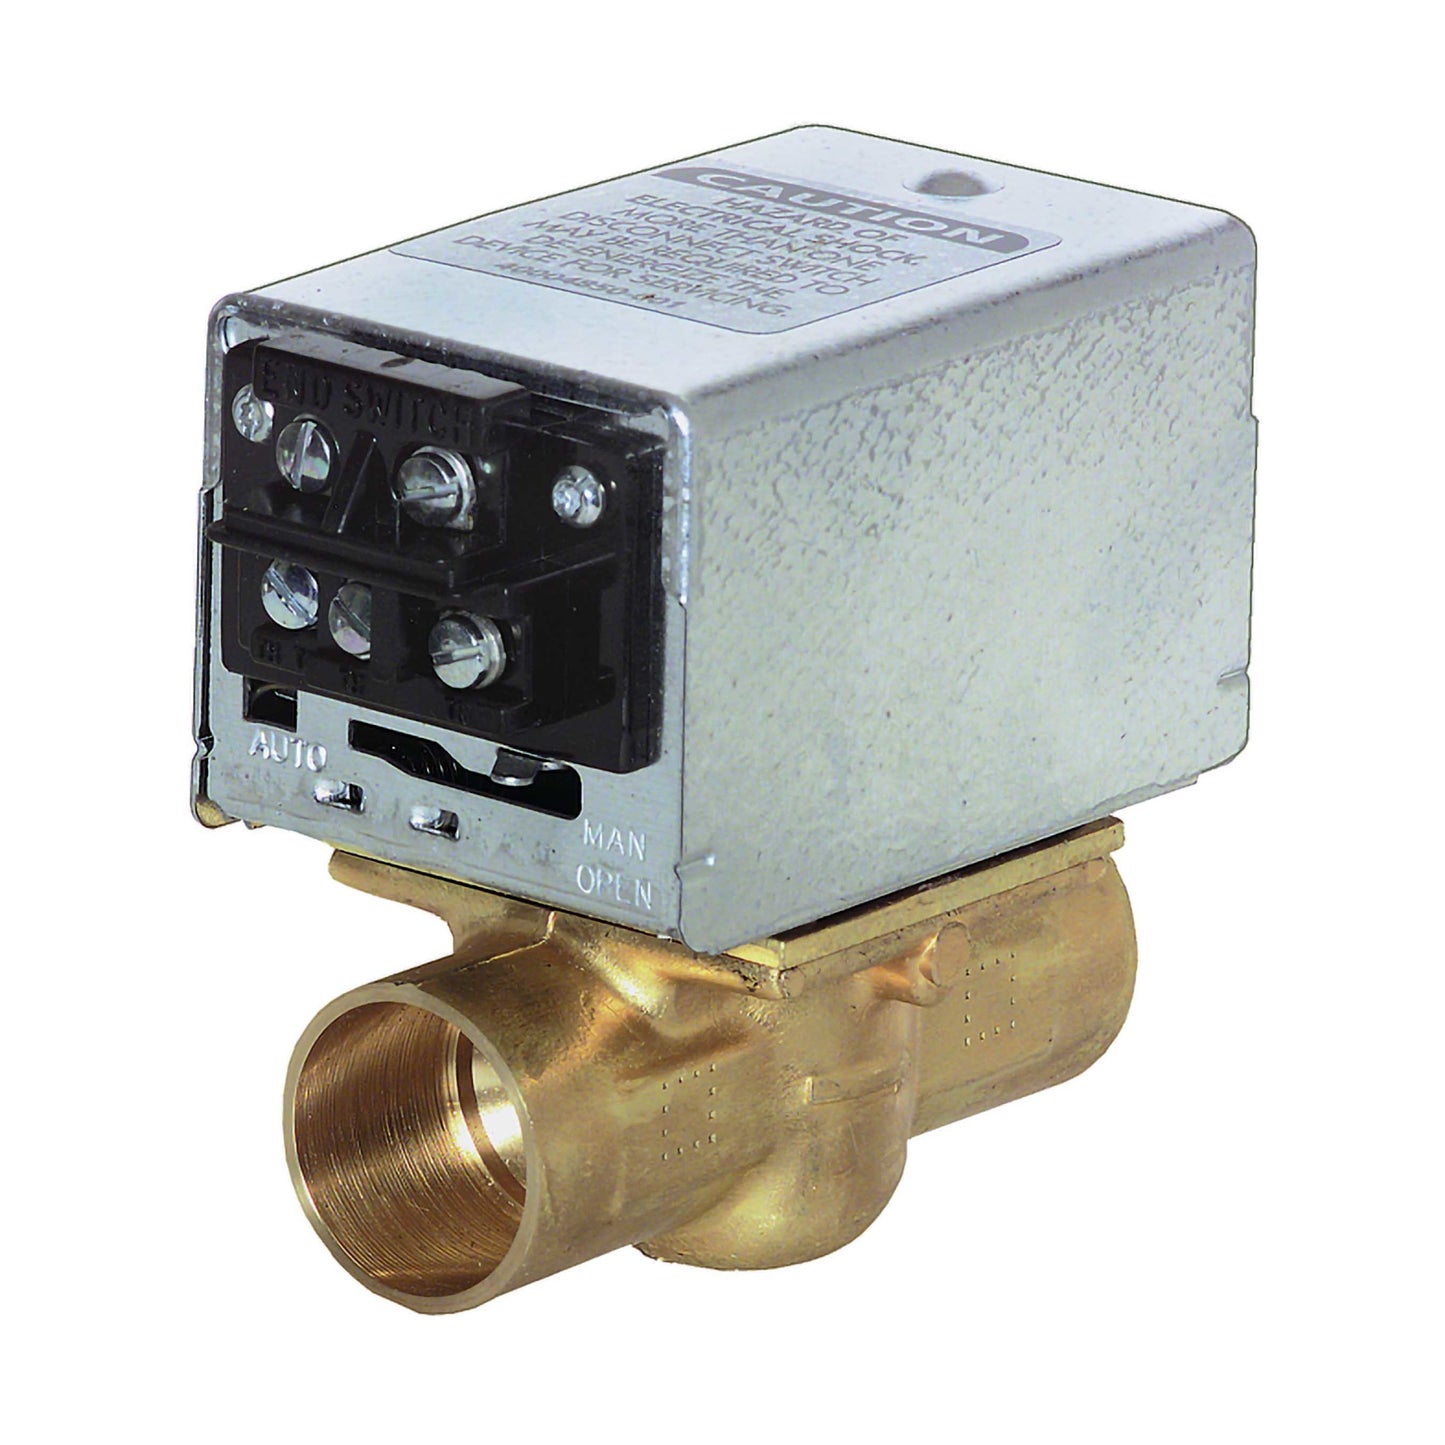 V8043F1036 - Low Voltage Normally Closed Zone Valve, 3/4" Sweat